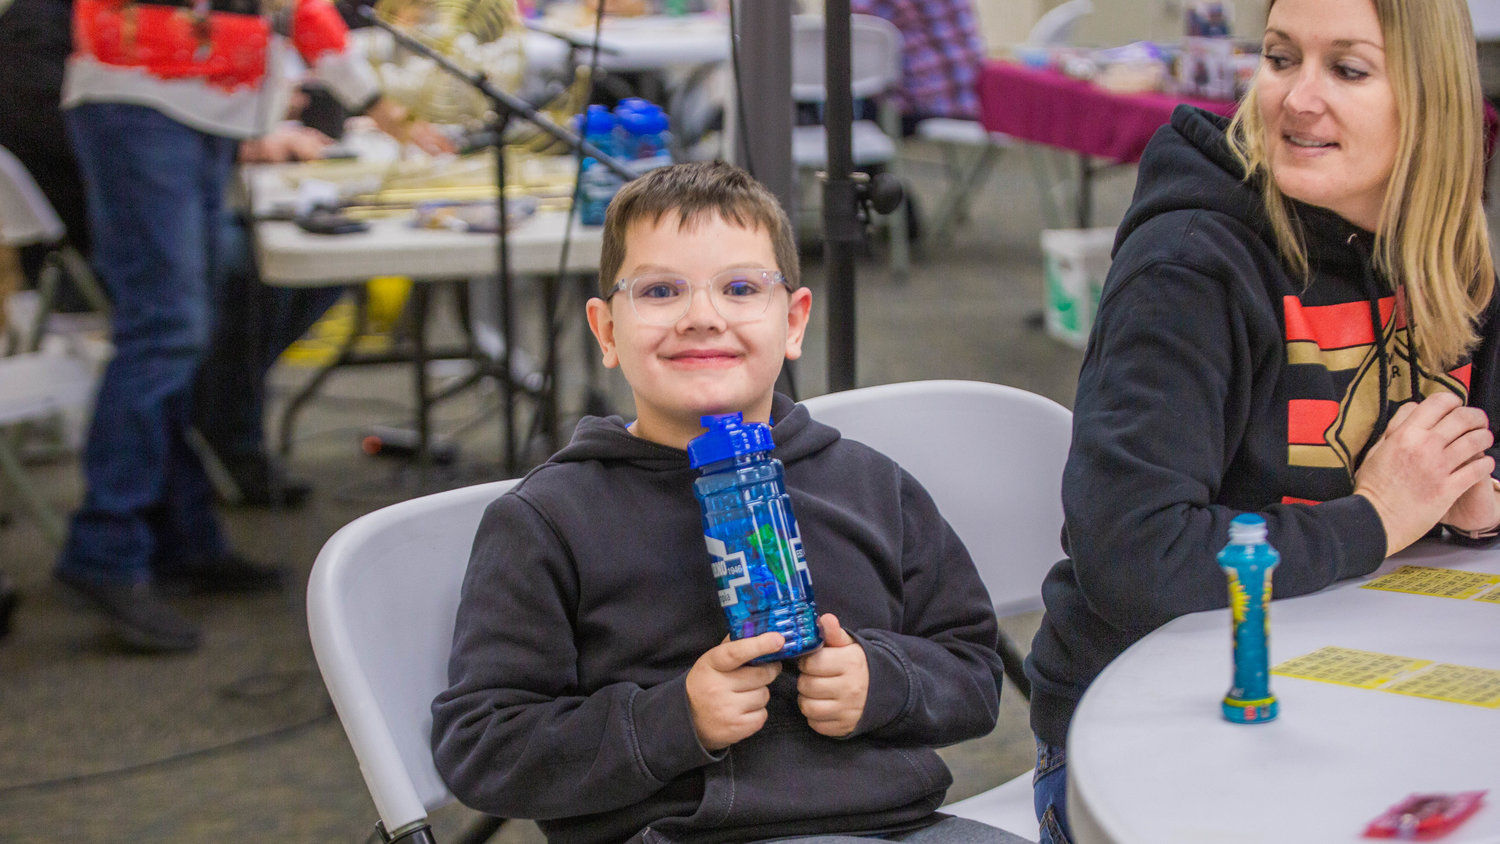 Banks Thomas, 7, smiles for a photo with a water bottle full of candy he won during Twin Cities Rotary Club Turkey Bingo in the Chehalis Eagles building on Saturday afternoon.